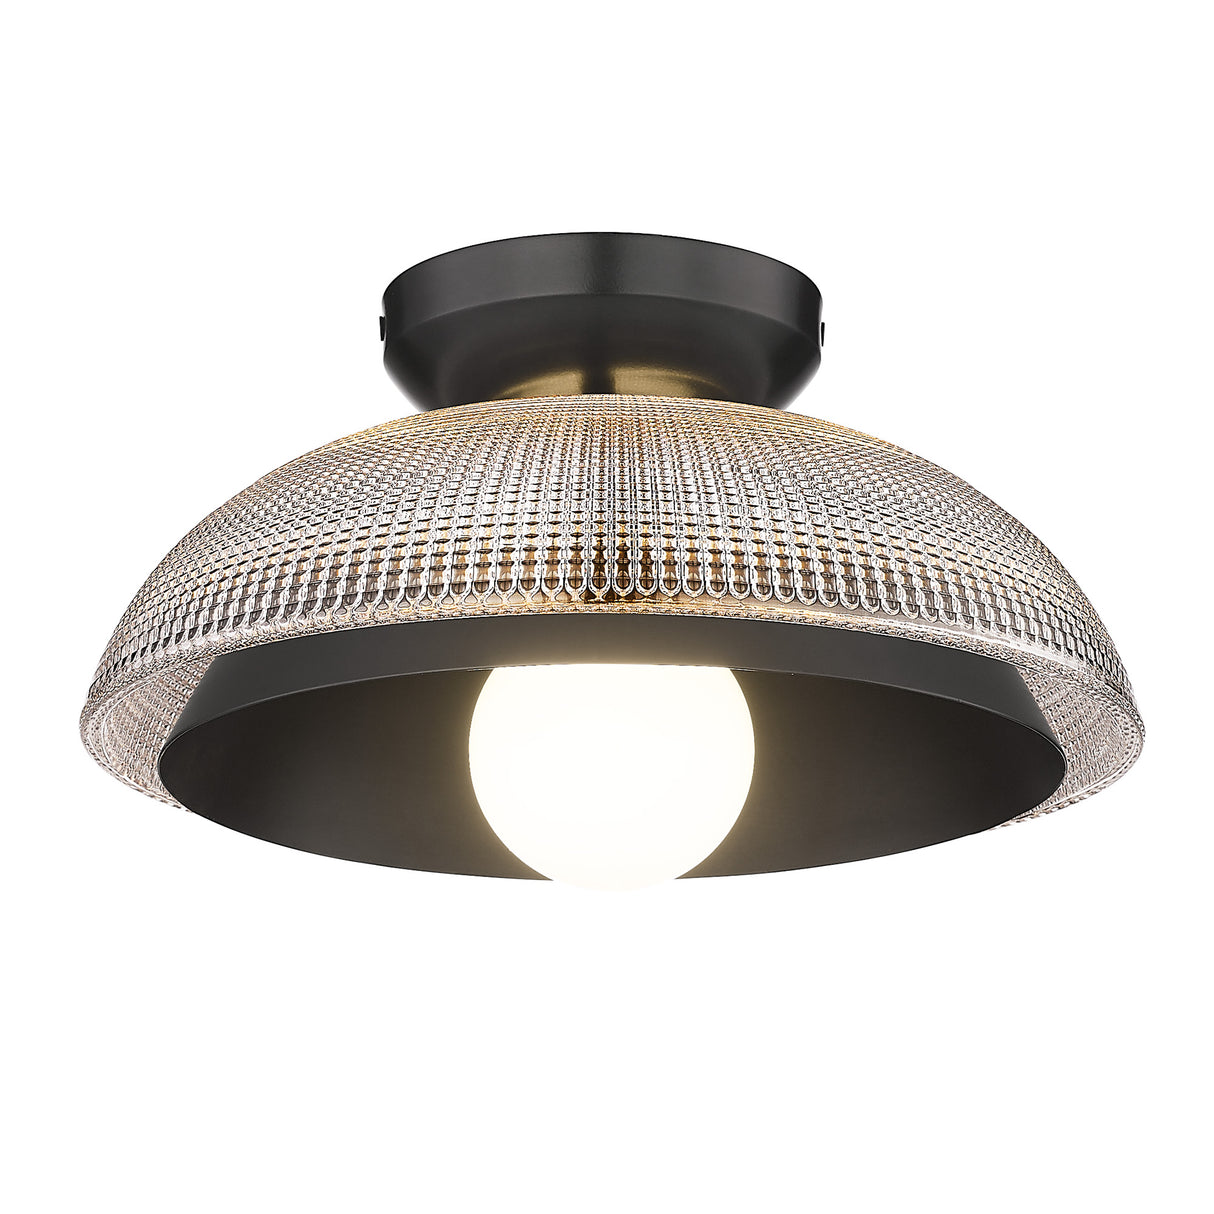 Crawford BLK Flush Mount in Matte Black with Retro Prism Glass Shade